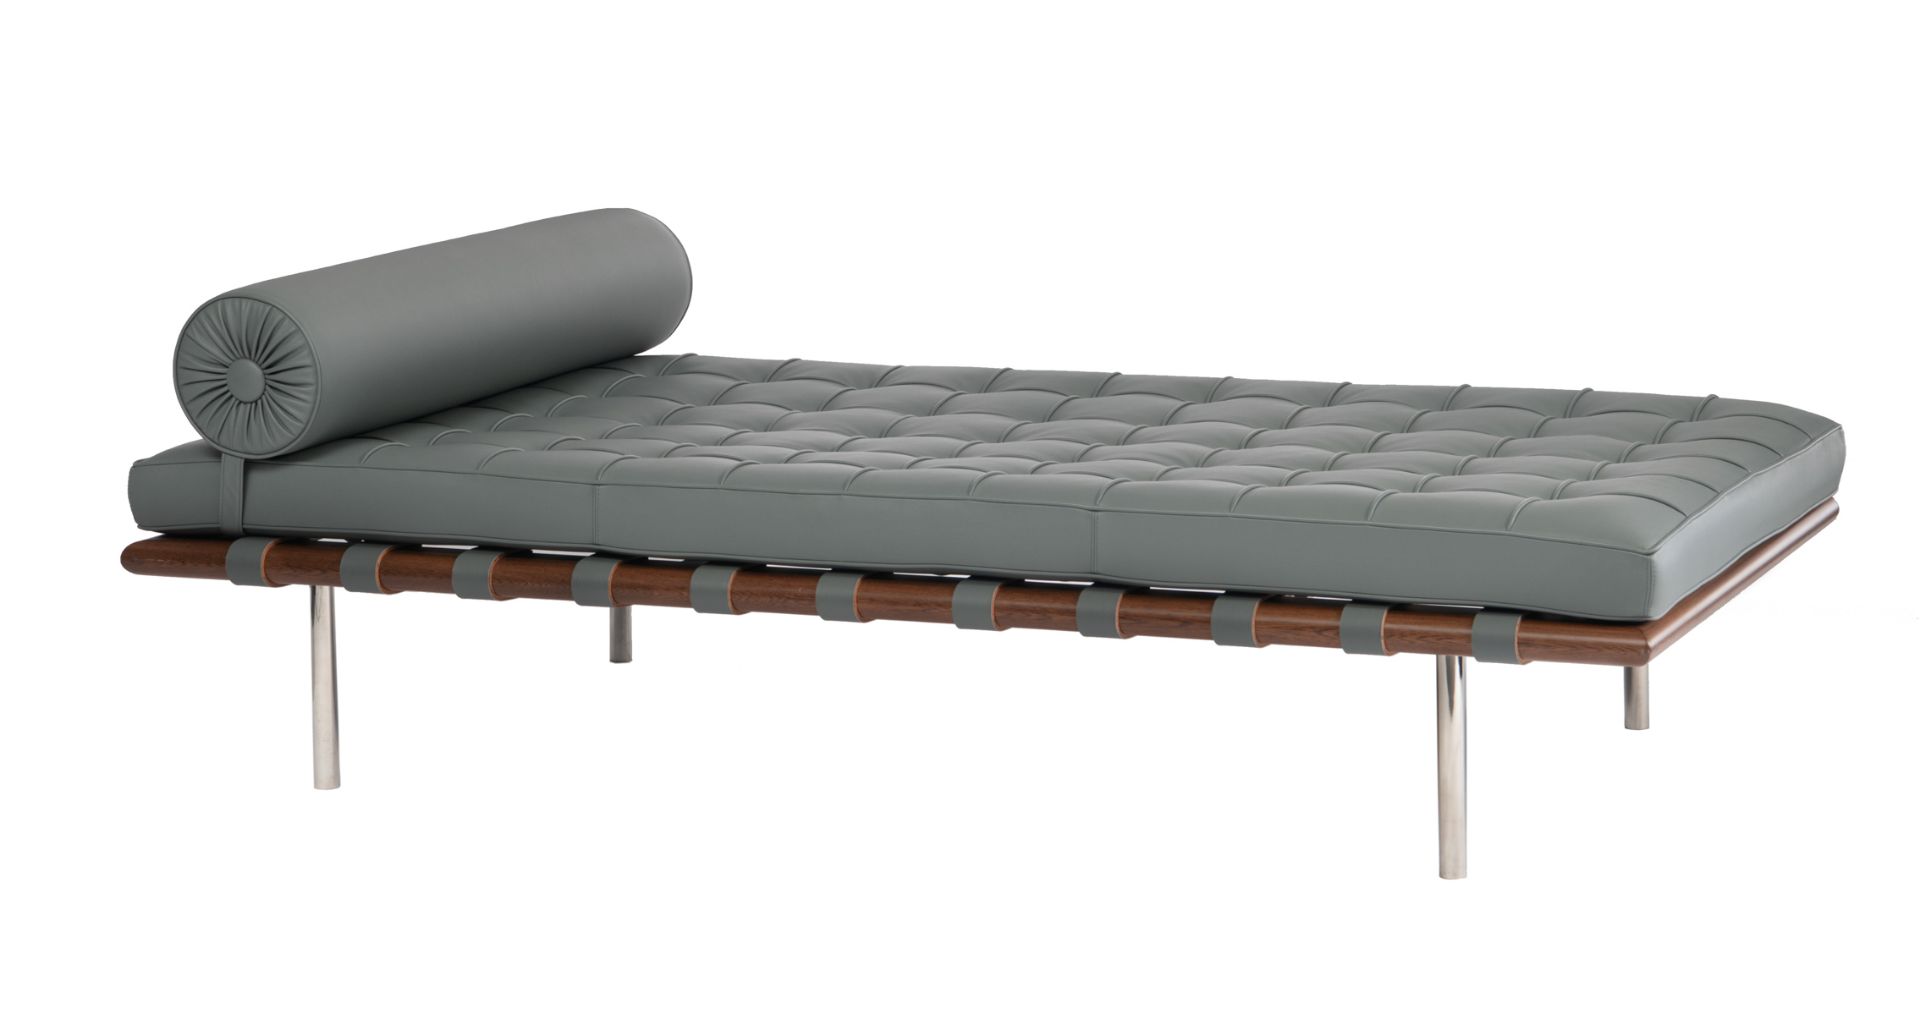 A grey leather upholstered Barcelona daybed, design by Ludwig Mies van der Rohe for Knoll Internatio